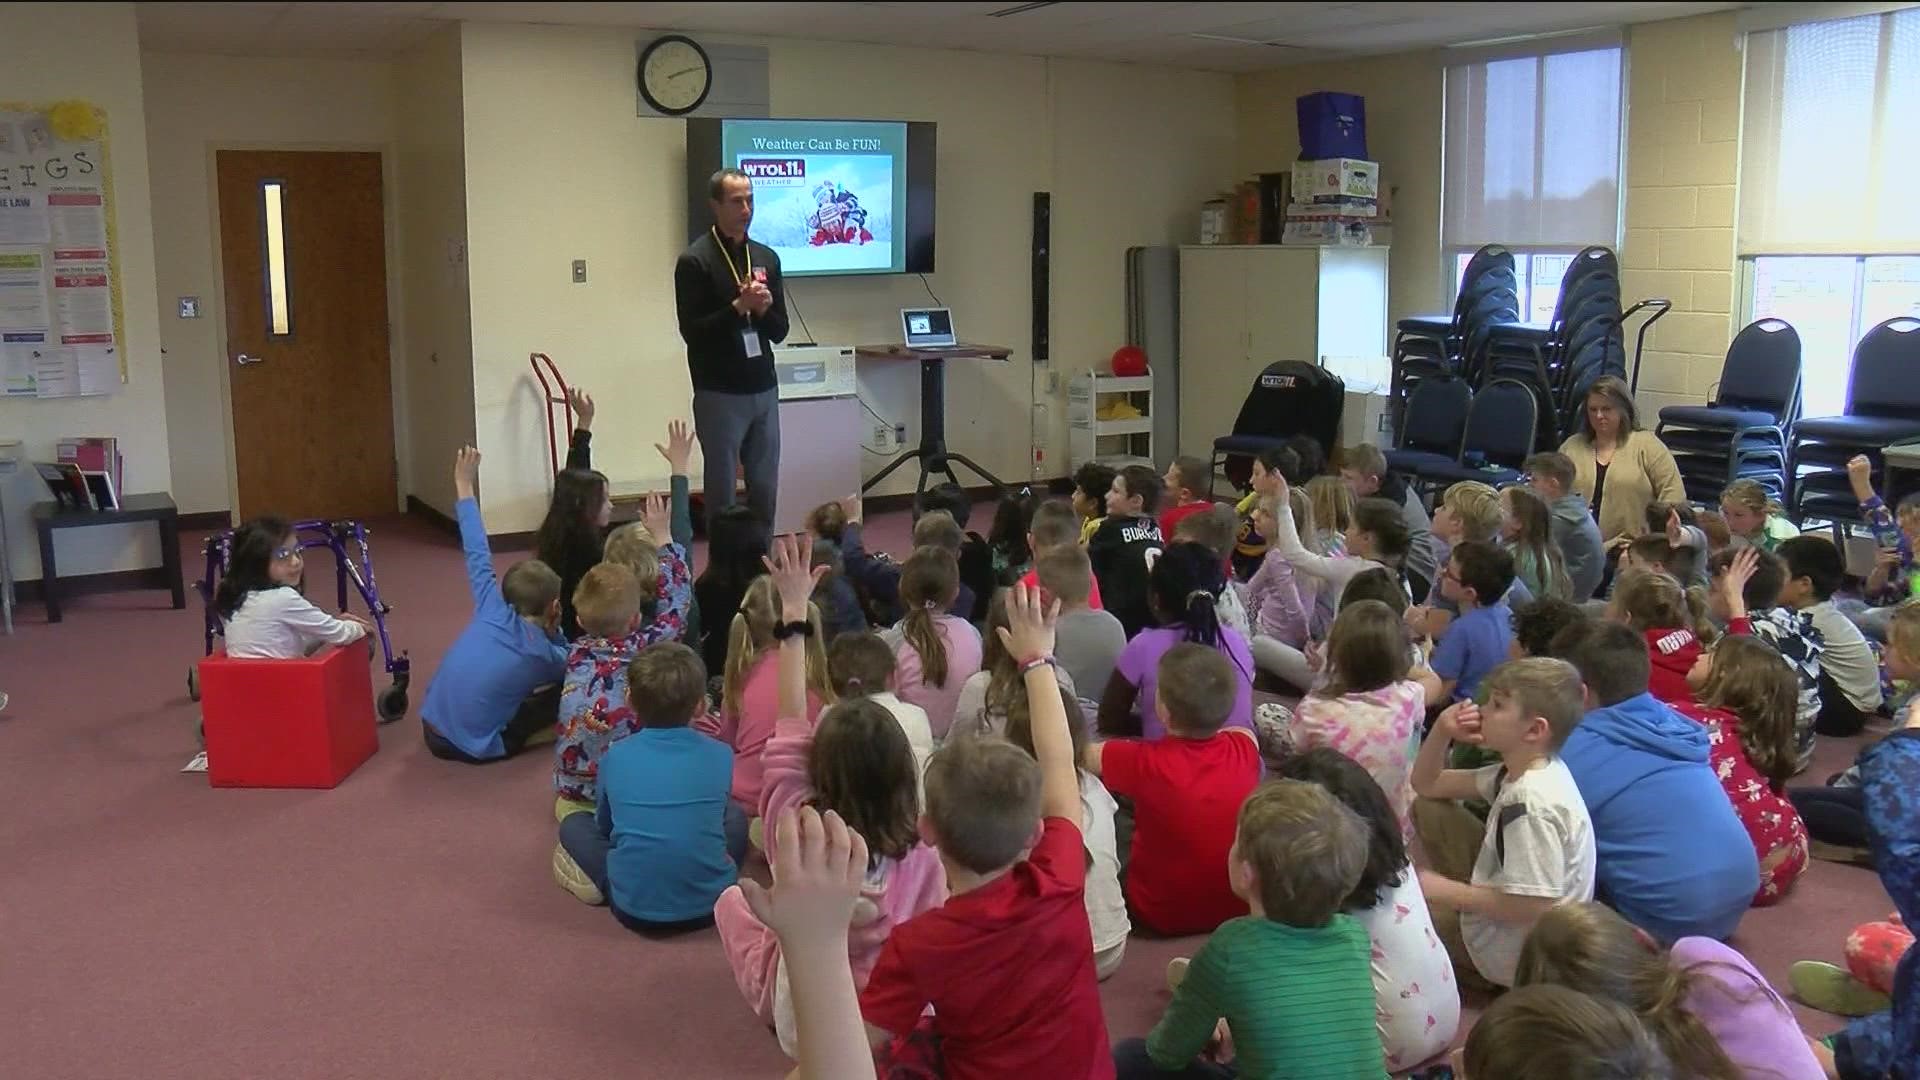 Chris Vickers paid a visit to Ft. Meigs Elementary second graders to share meteorology and science demonstrations and answer some tough questions from the kids.